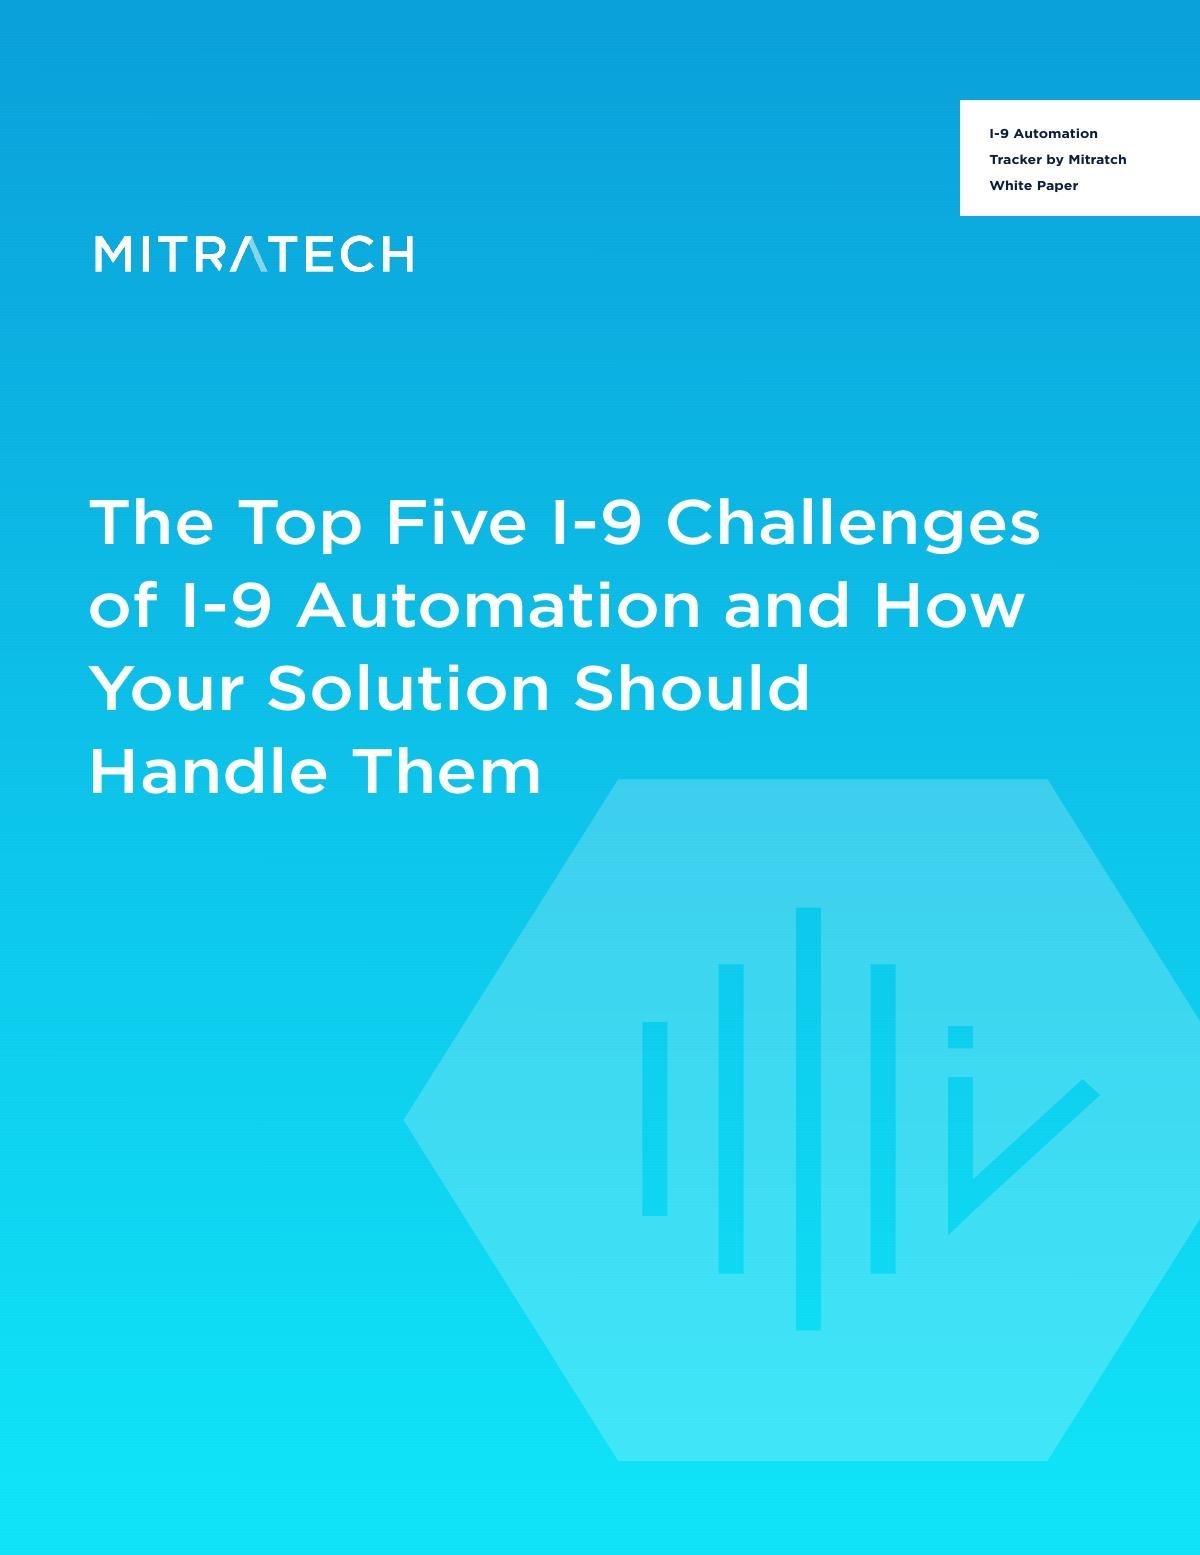 The Top Five Challenges of I-9 Automation and How Your Solution Should Handle Them